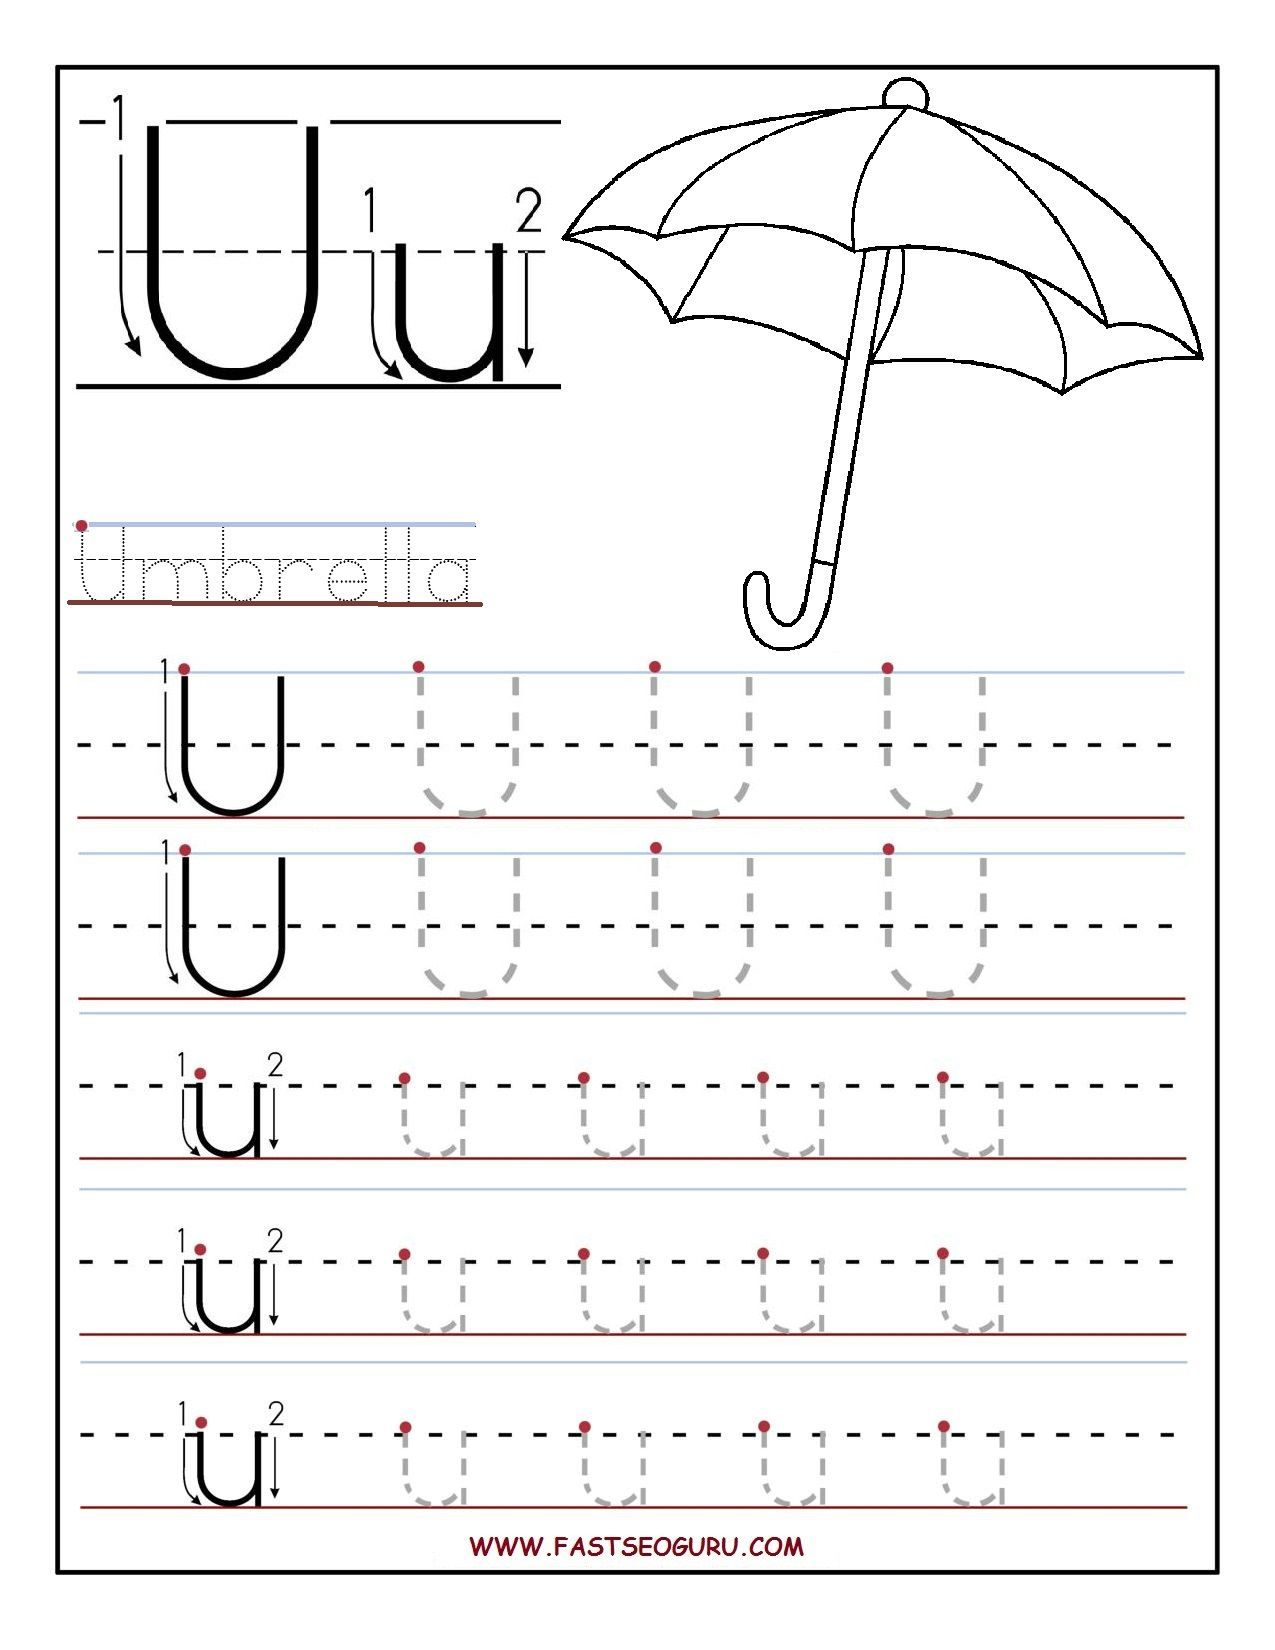 Printable Letter U Tracing Worksheets For Preschool throughout Tracing Alphabet U